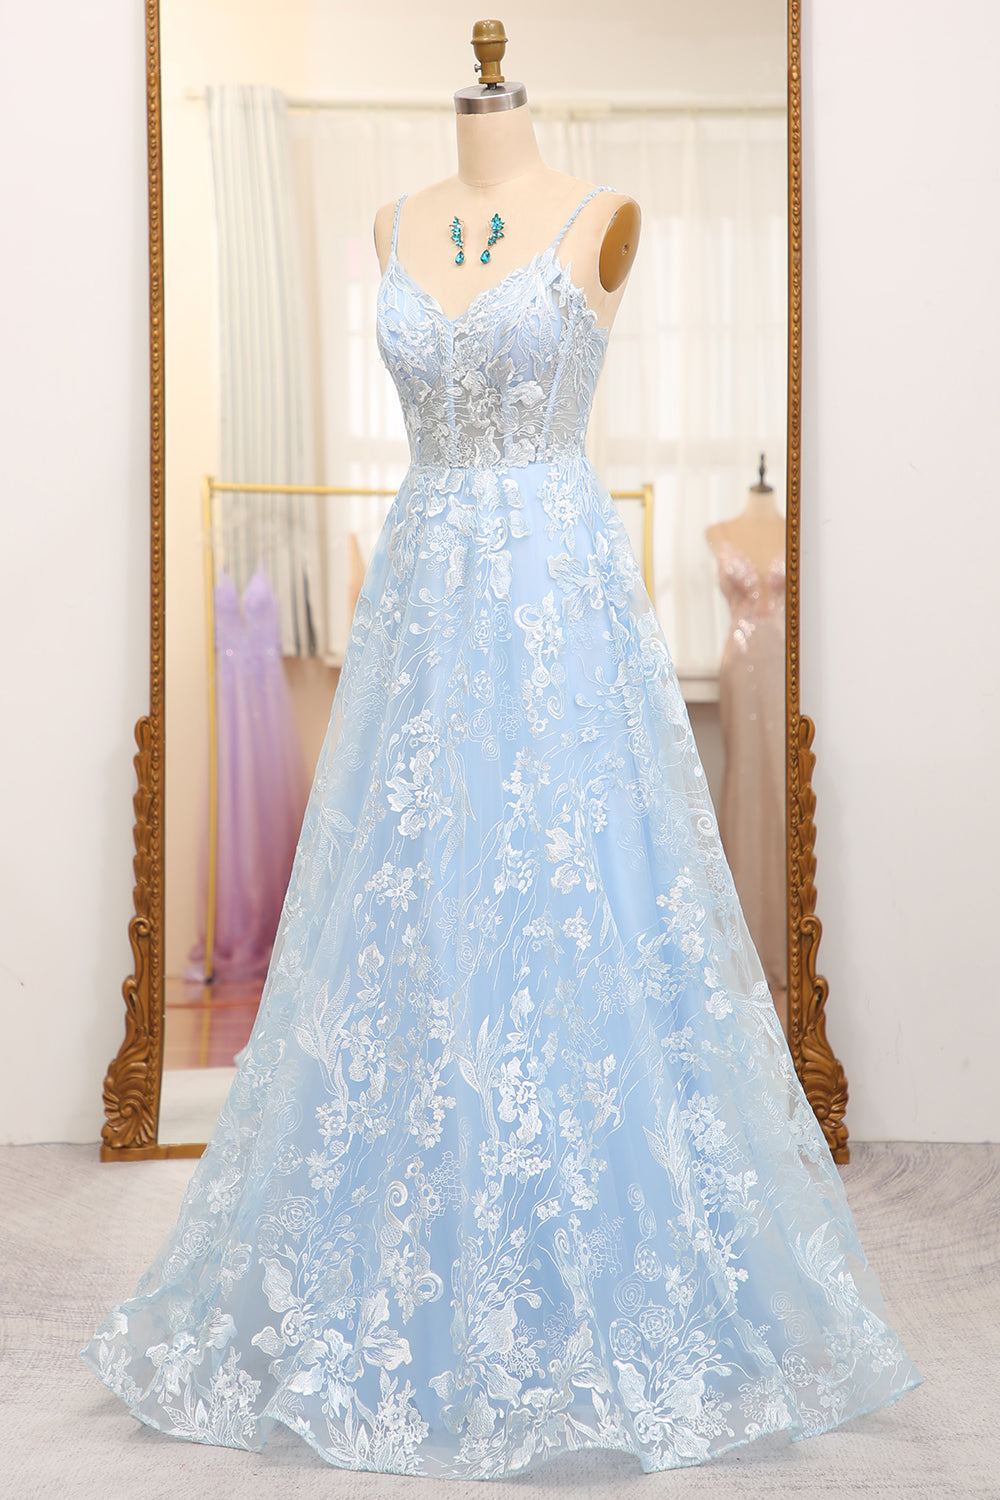 Prom Dresses Inspired, Sky Blue A-Line Spaghetti Straps Tulle Long Prom Dress With Appliques